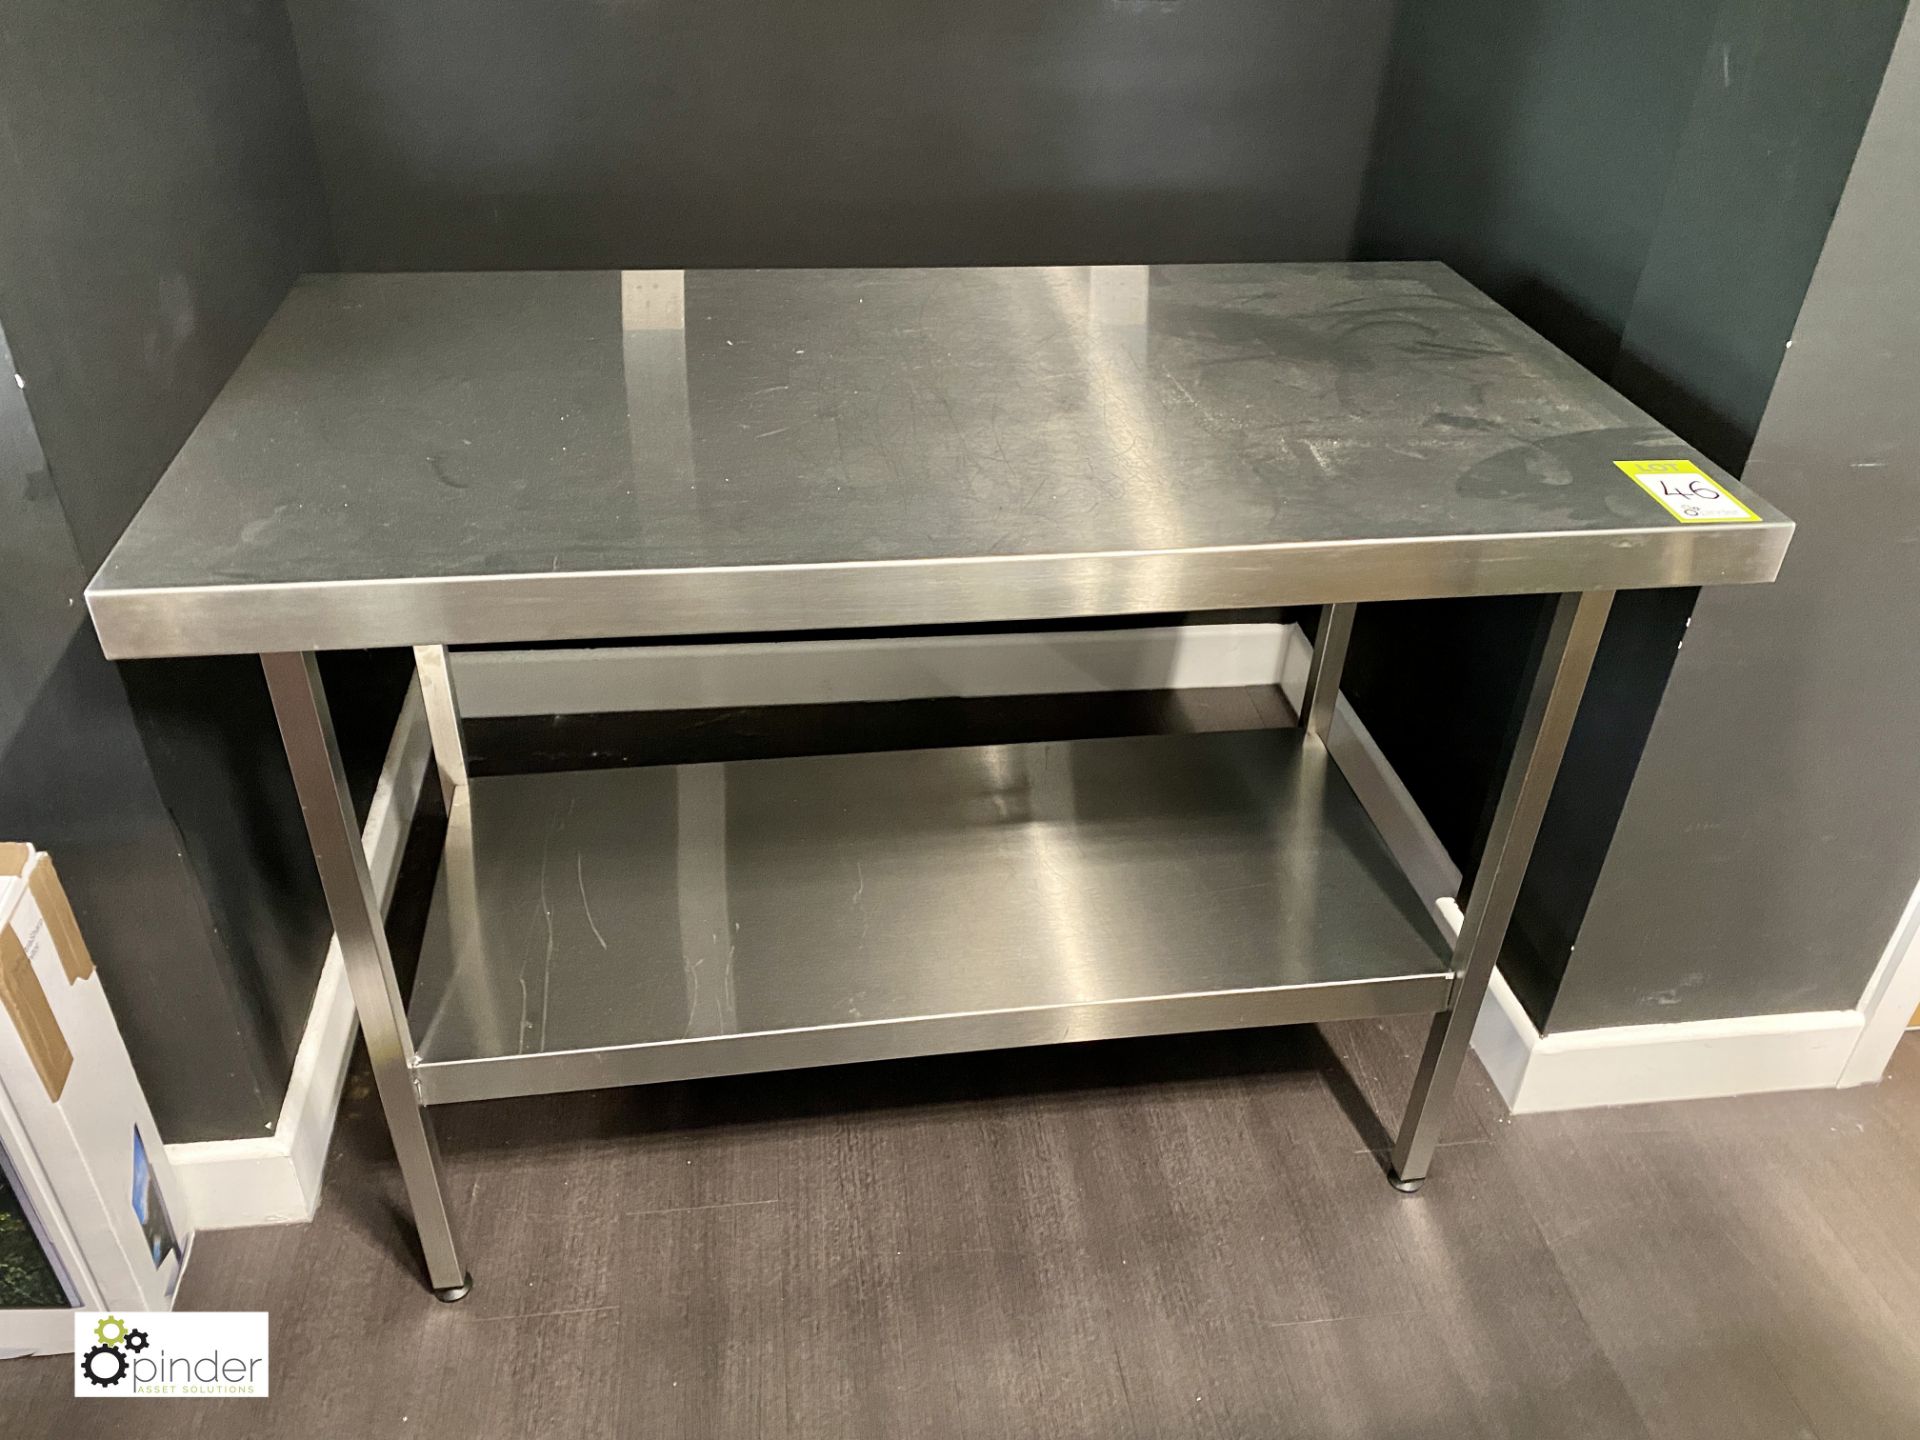 Stainless steel Preparation Table, with undershelf, 1200mm x 650mm x 890mm - Image 2 of 3